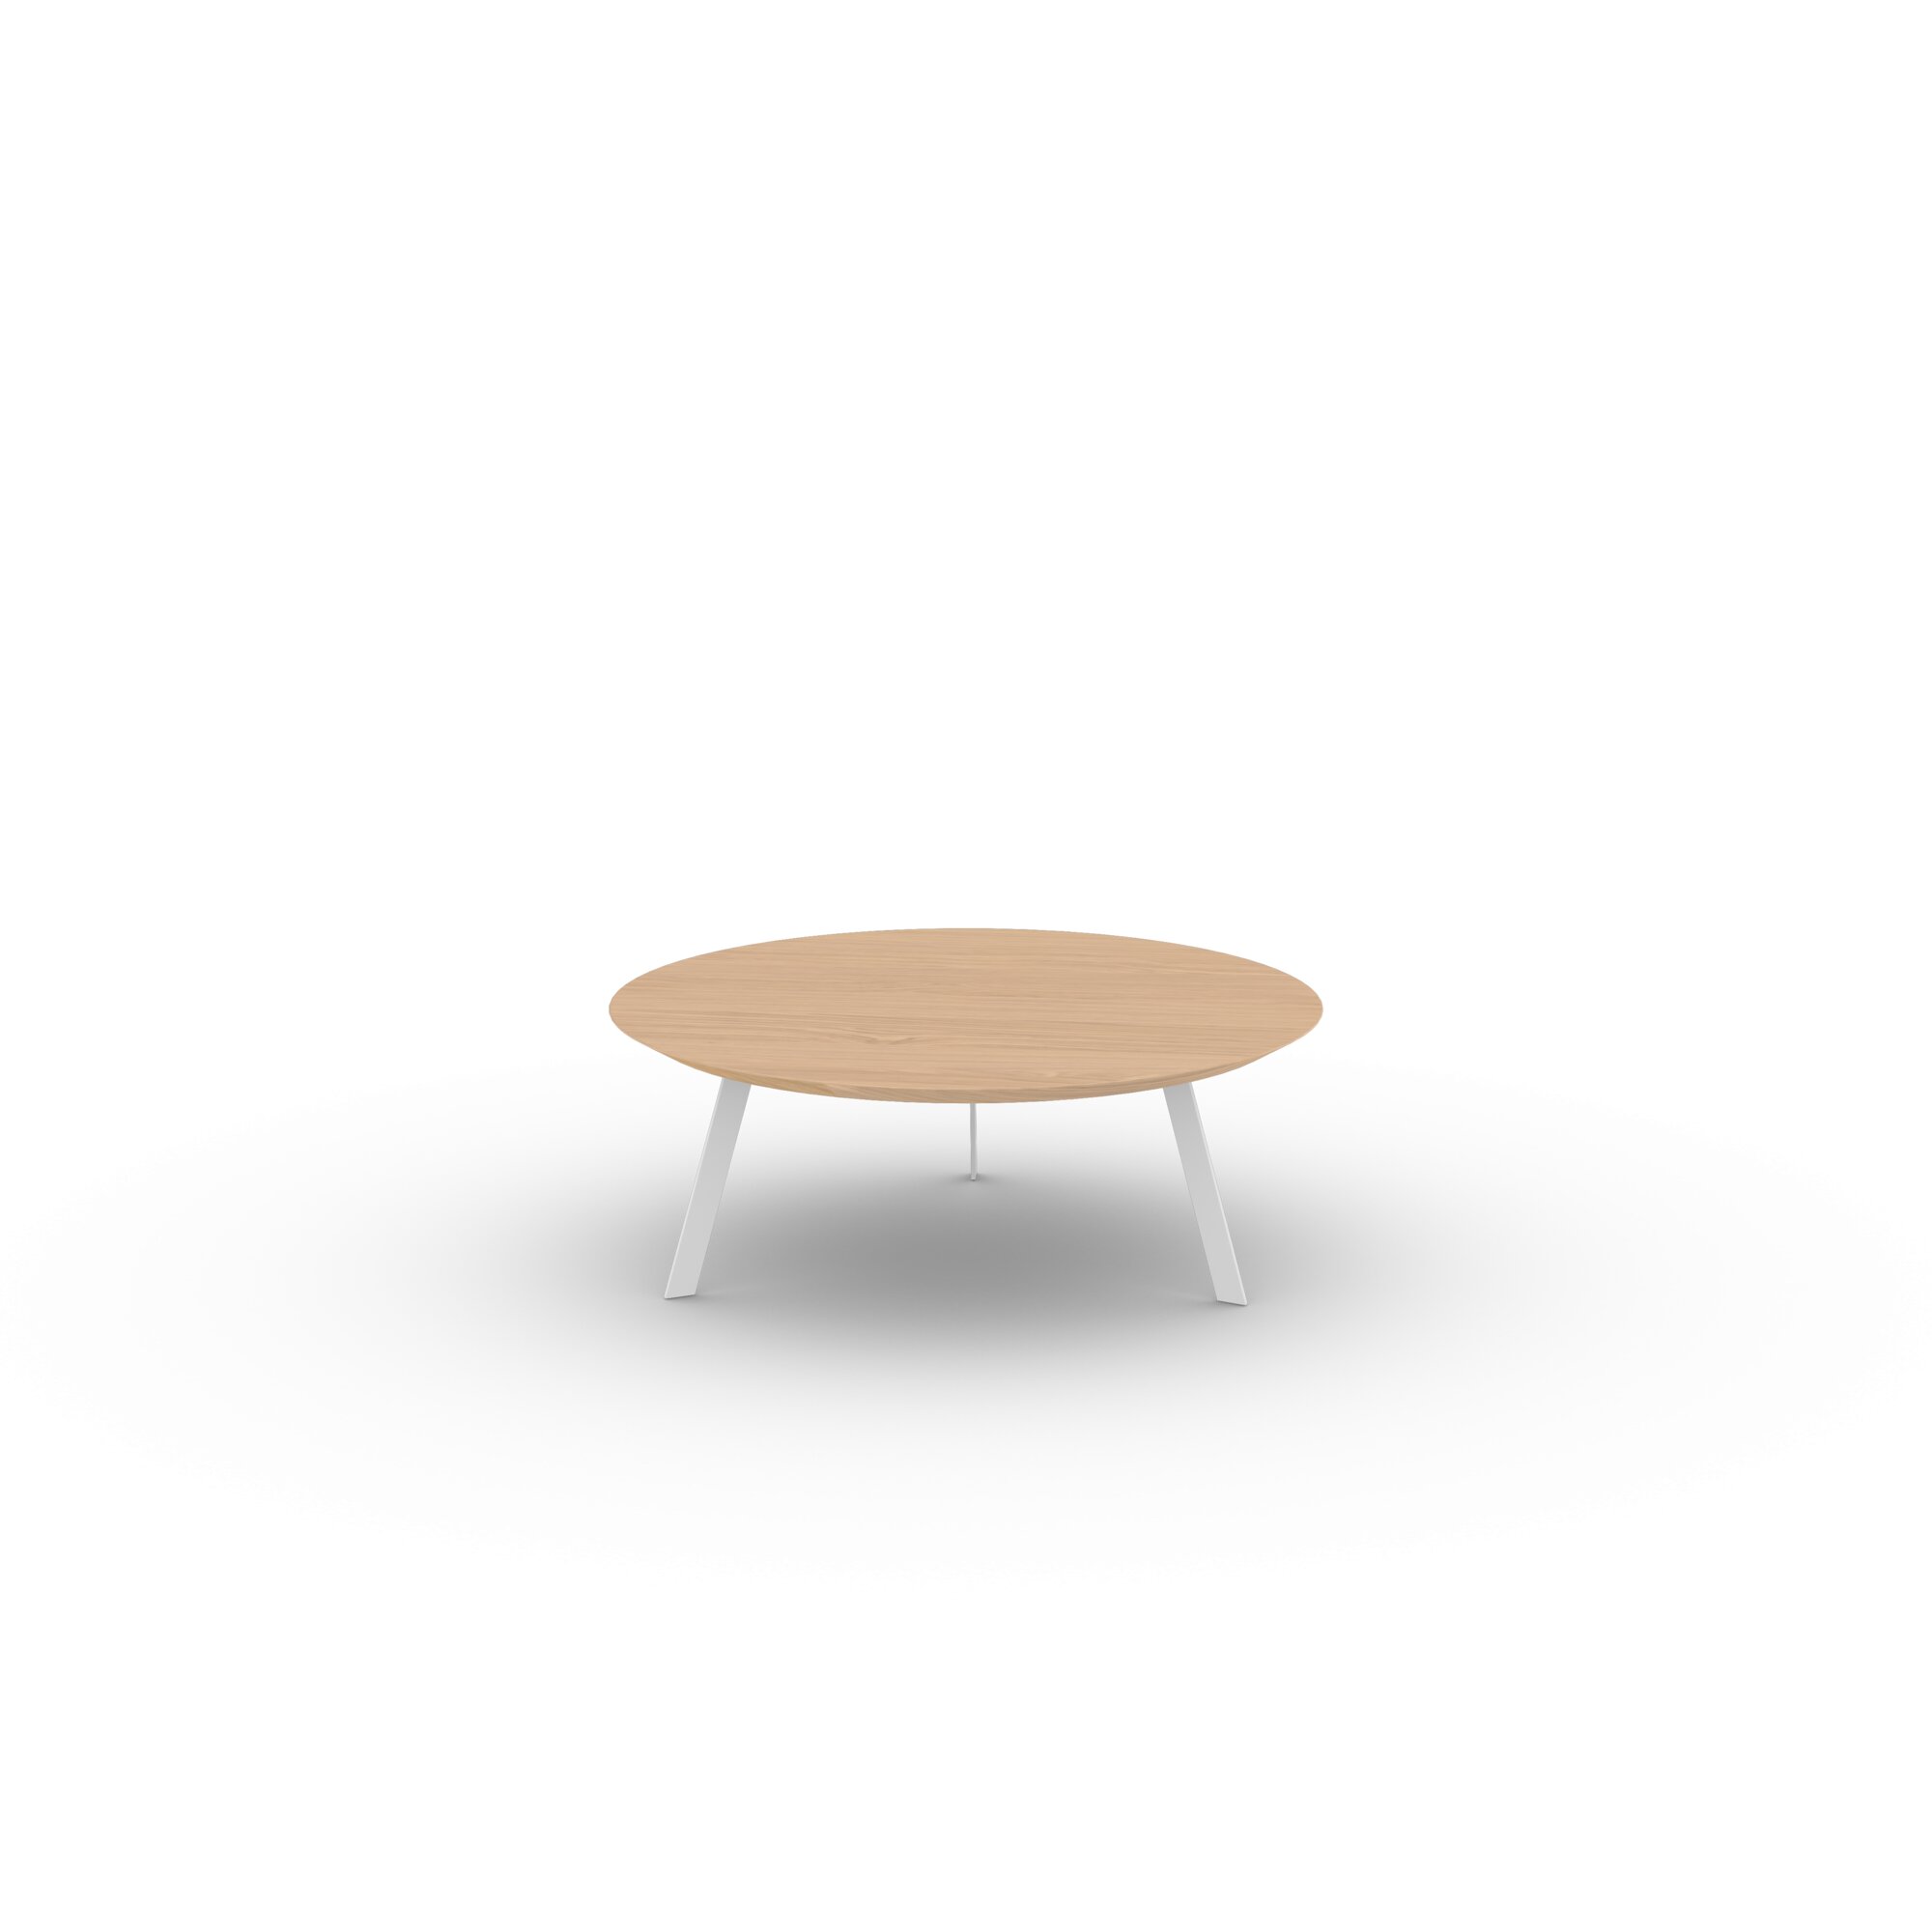 Design Coffee Table | New Co Coffee Table 90 Round White | Oak hardwax oil natural light 3041 | Studio HENK| 